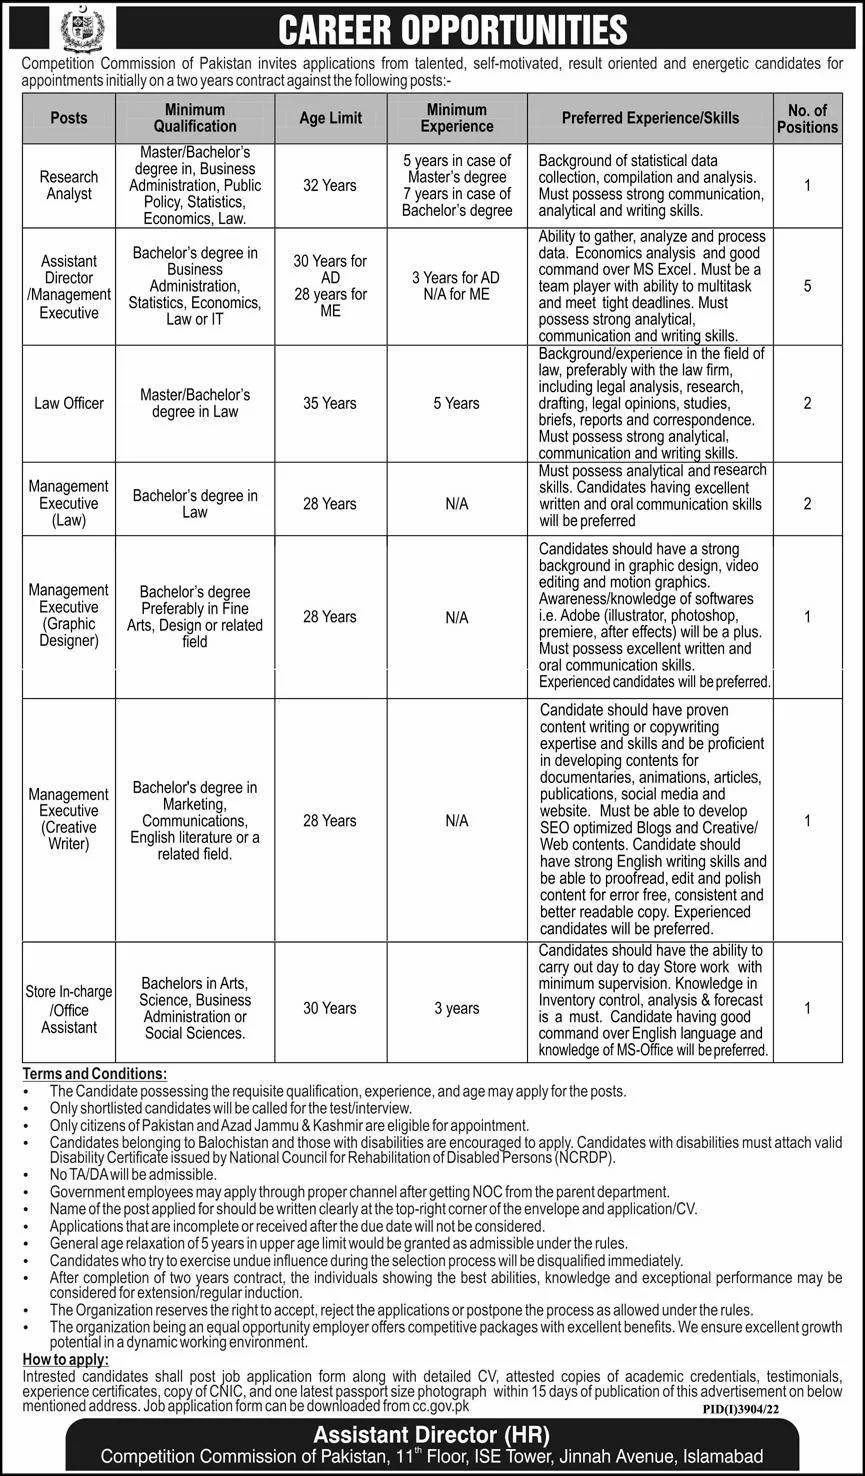 Govt Jobs in Pakistan 2022 At Competition Commission of Pakistan